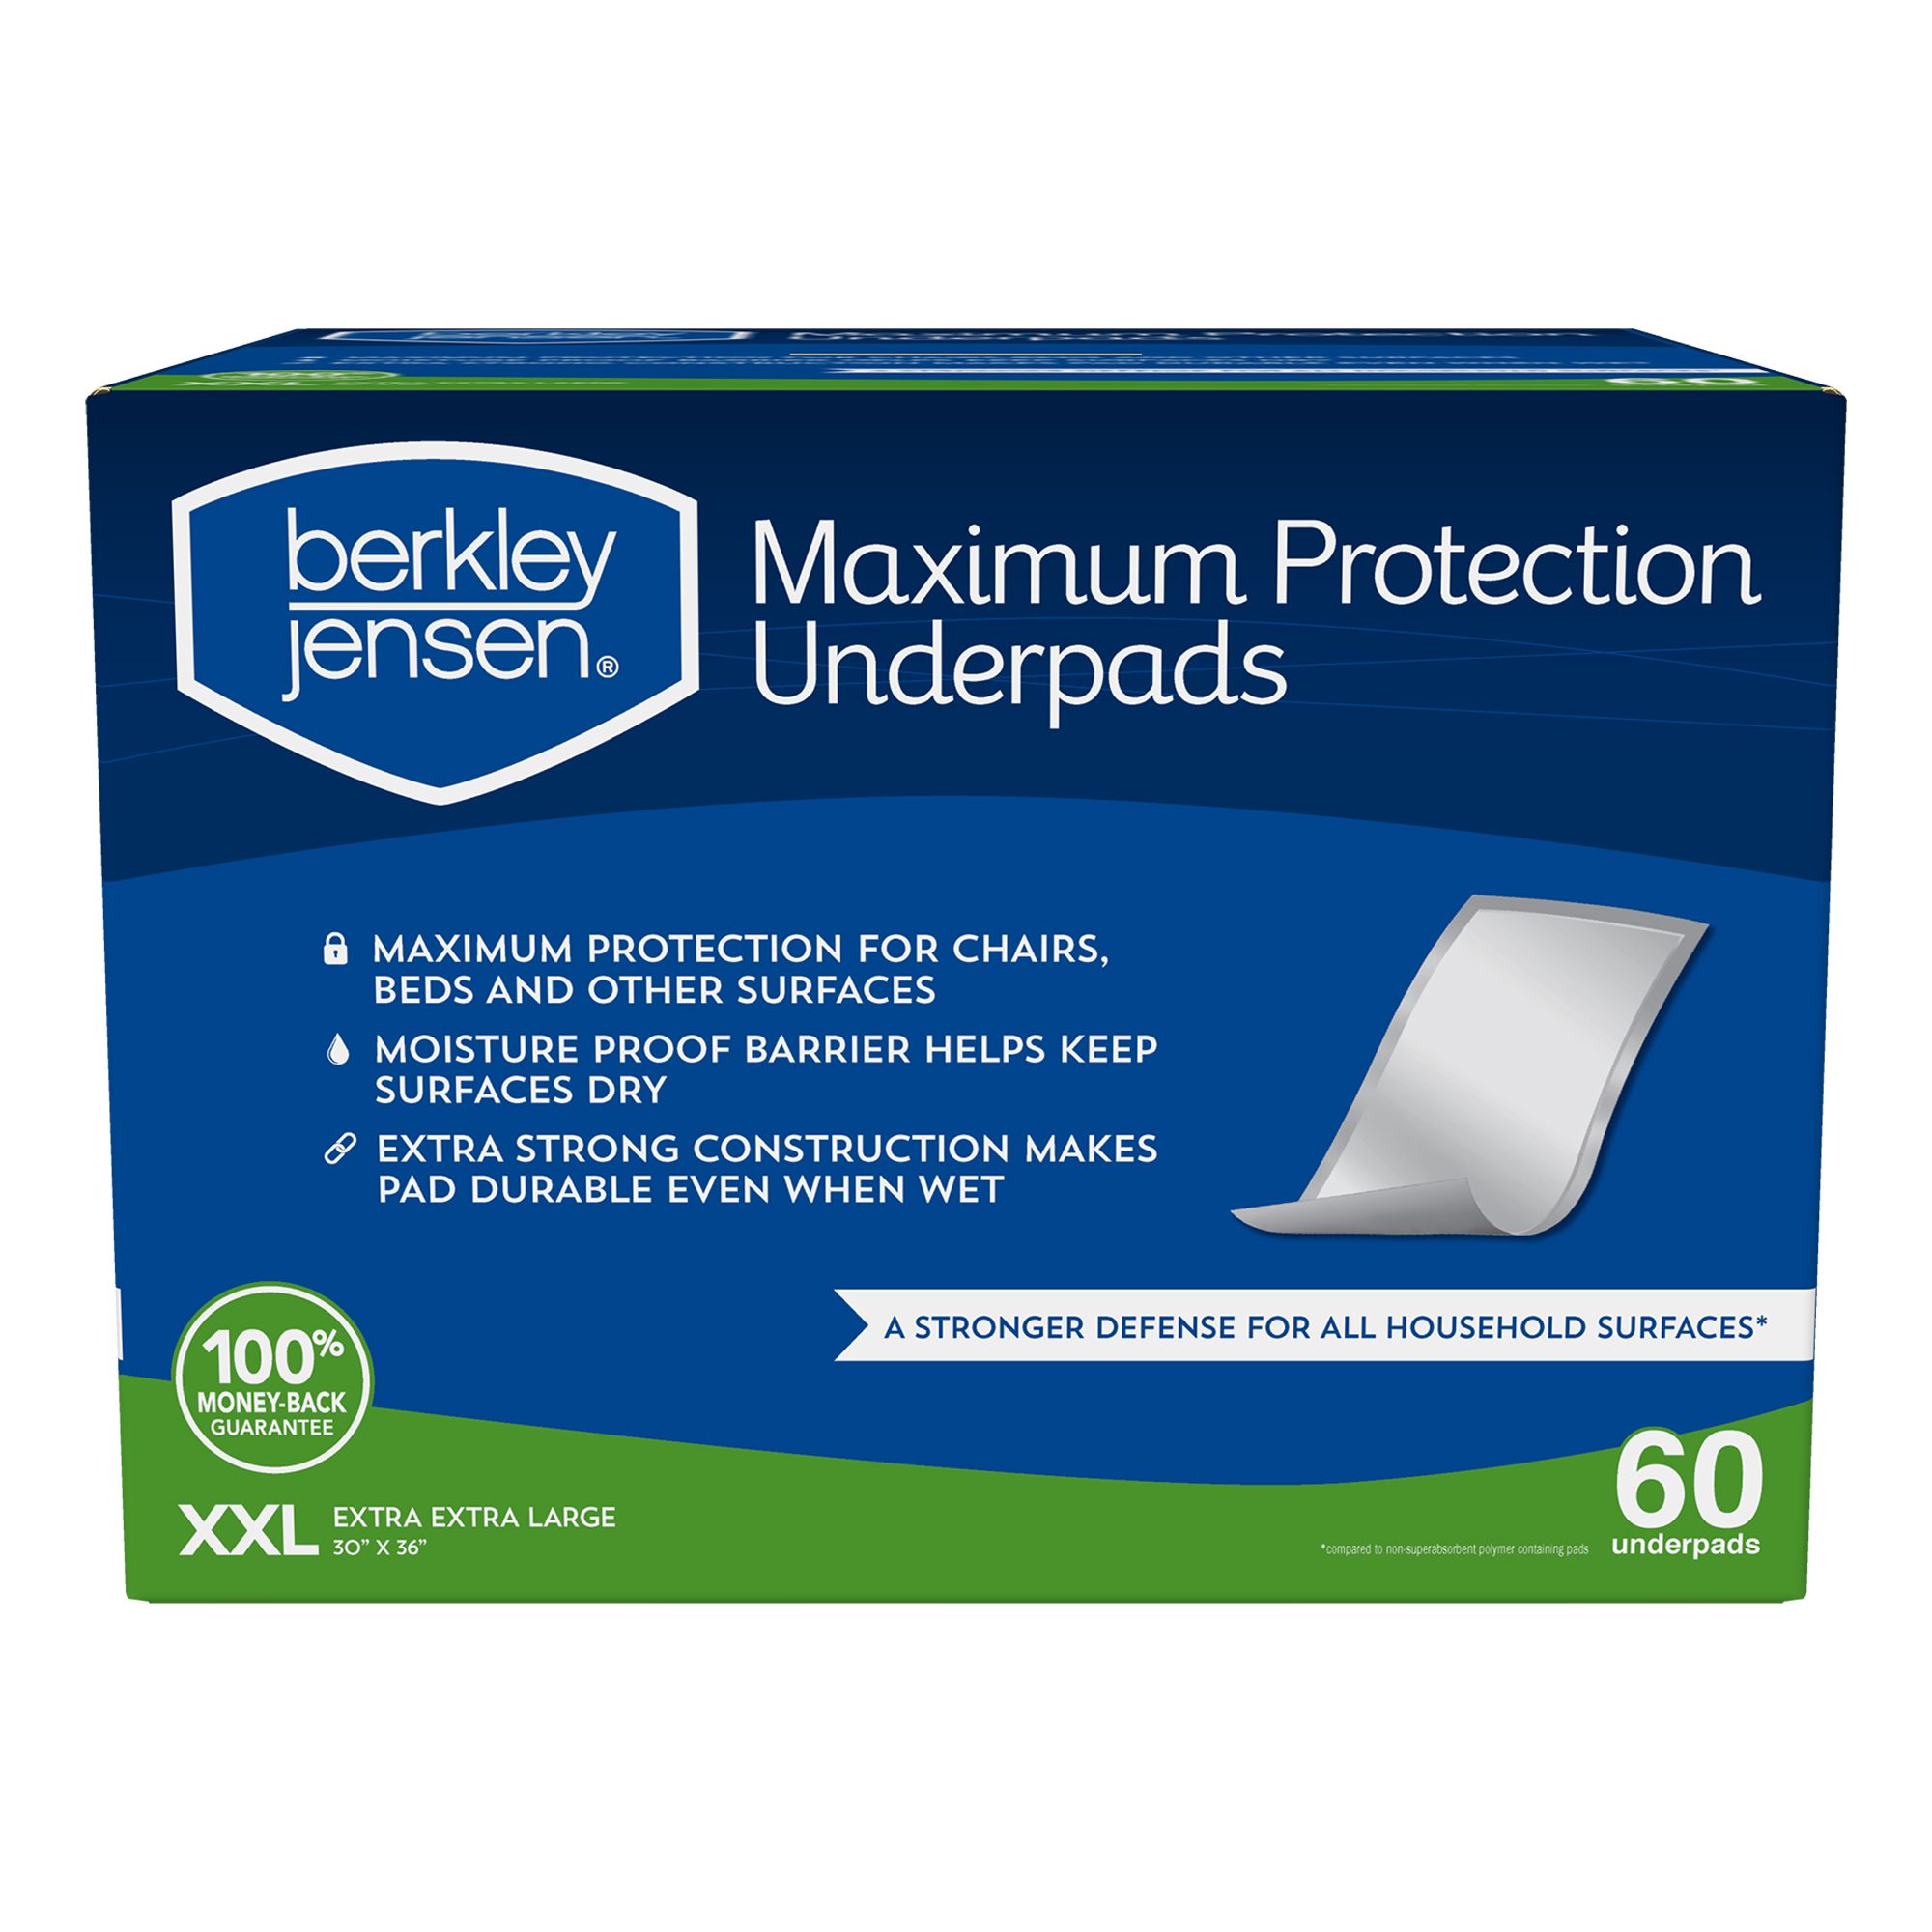 Depend FIT-FLEX Max Absorbency, Incontinence Underwear for Women,S, Tan, 92  Online in Dubai , United Arab Emirates